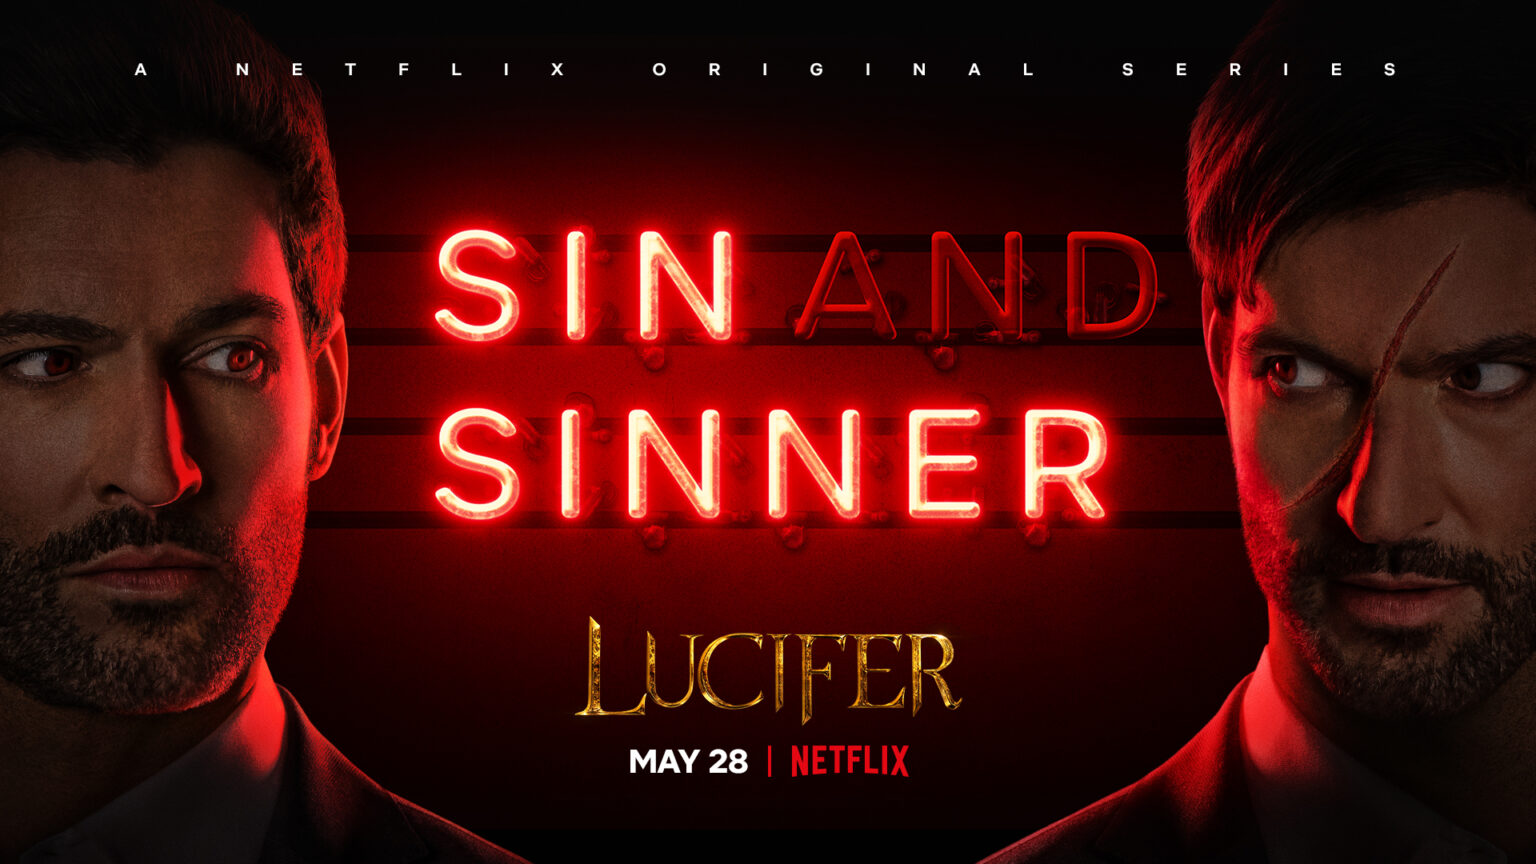 ‘Lucifer’ Season 5 Part 2 Trailer: Lucifer To Be the New God? cover